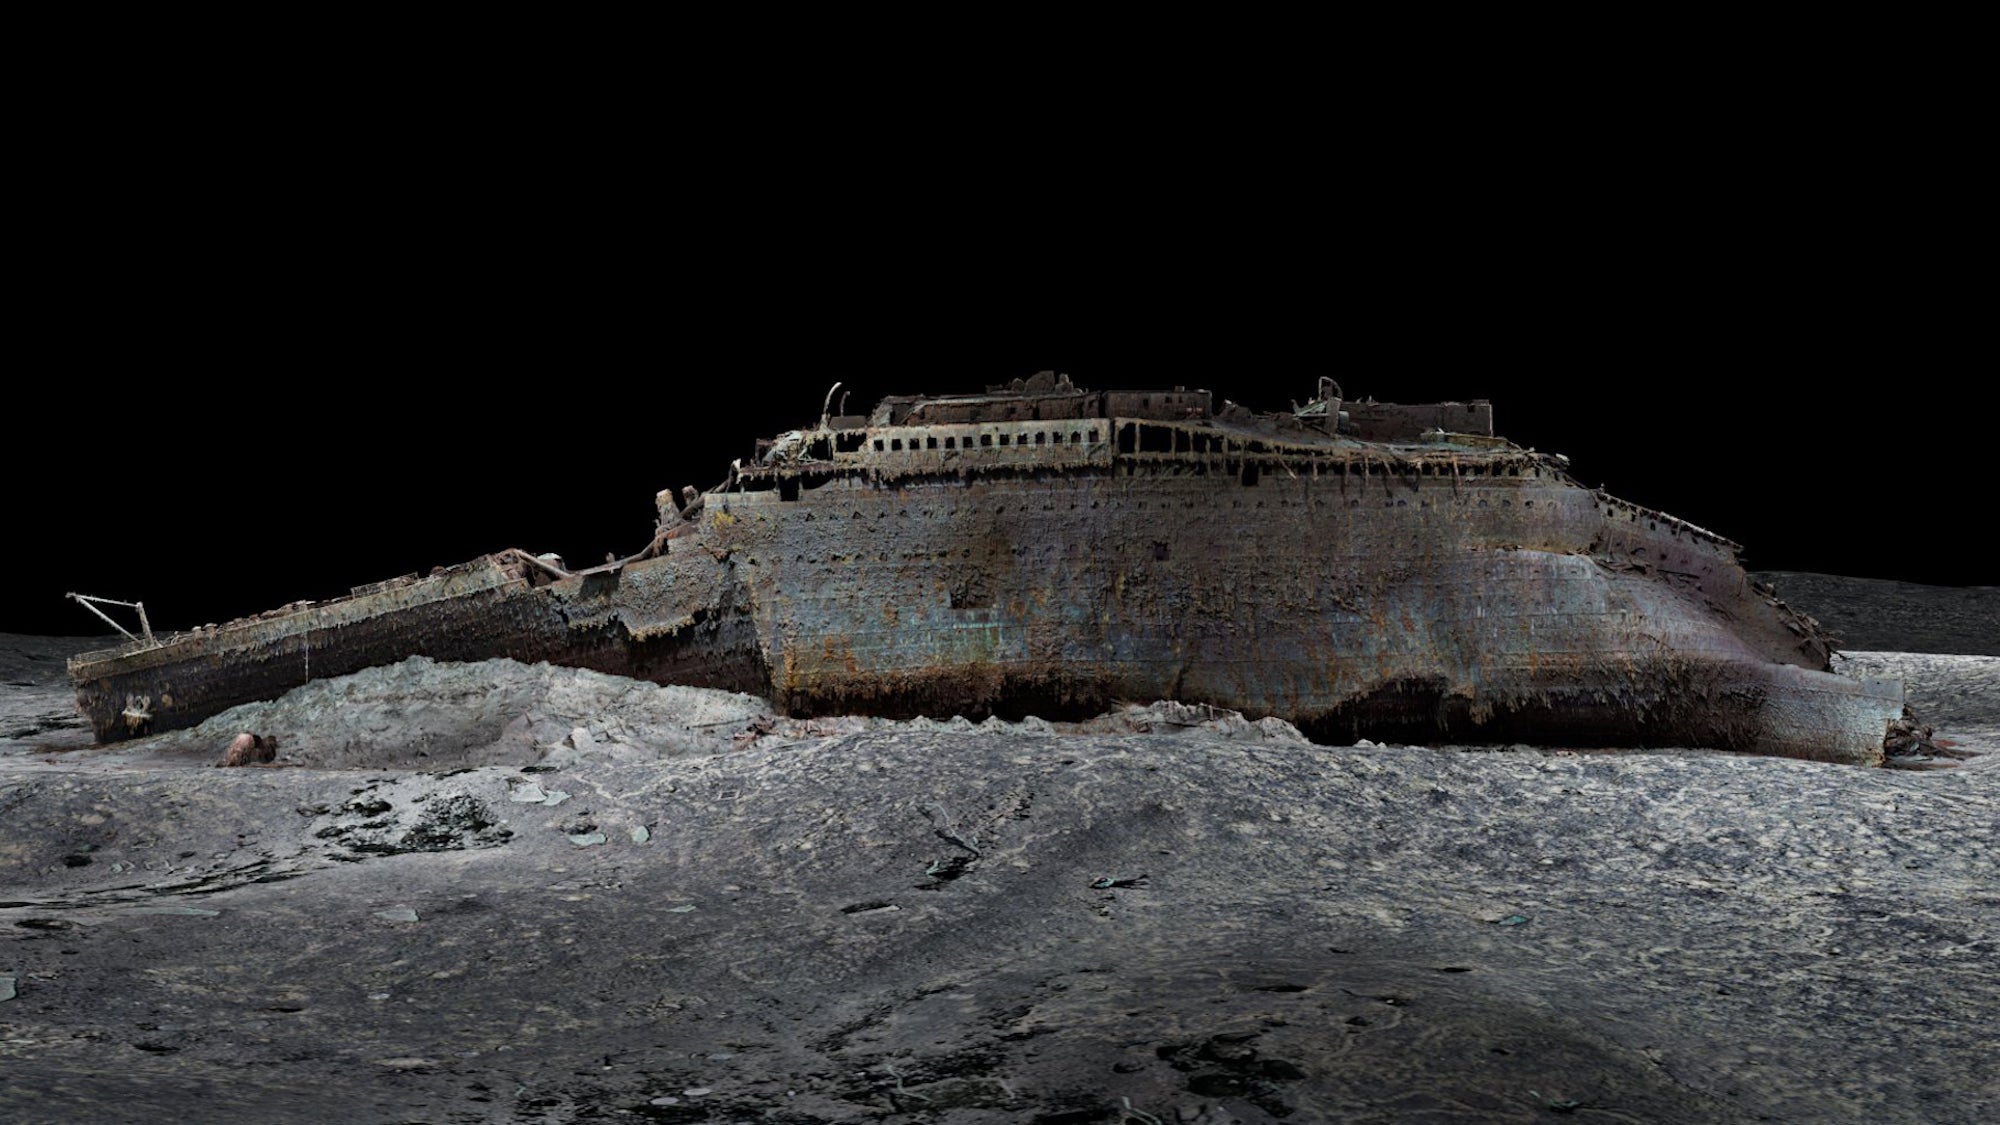 Staggering 3D scan of the Titanic shows the wreck down to the millimeter